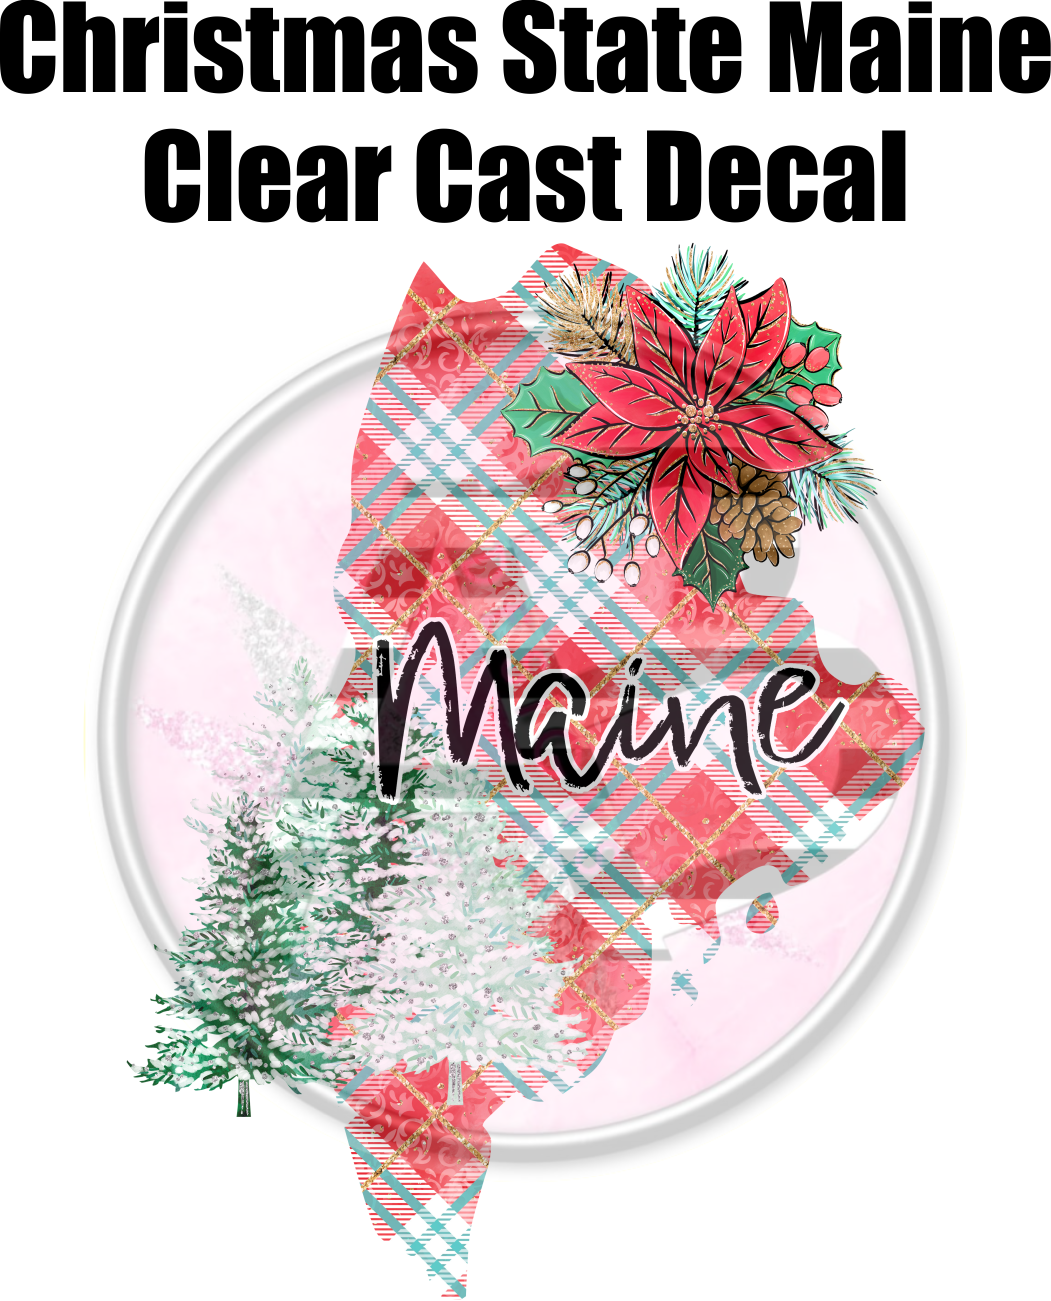 Christmas State Maine - Clear Cast Decal